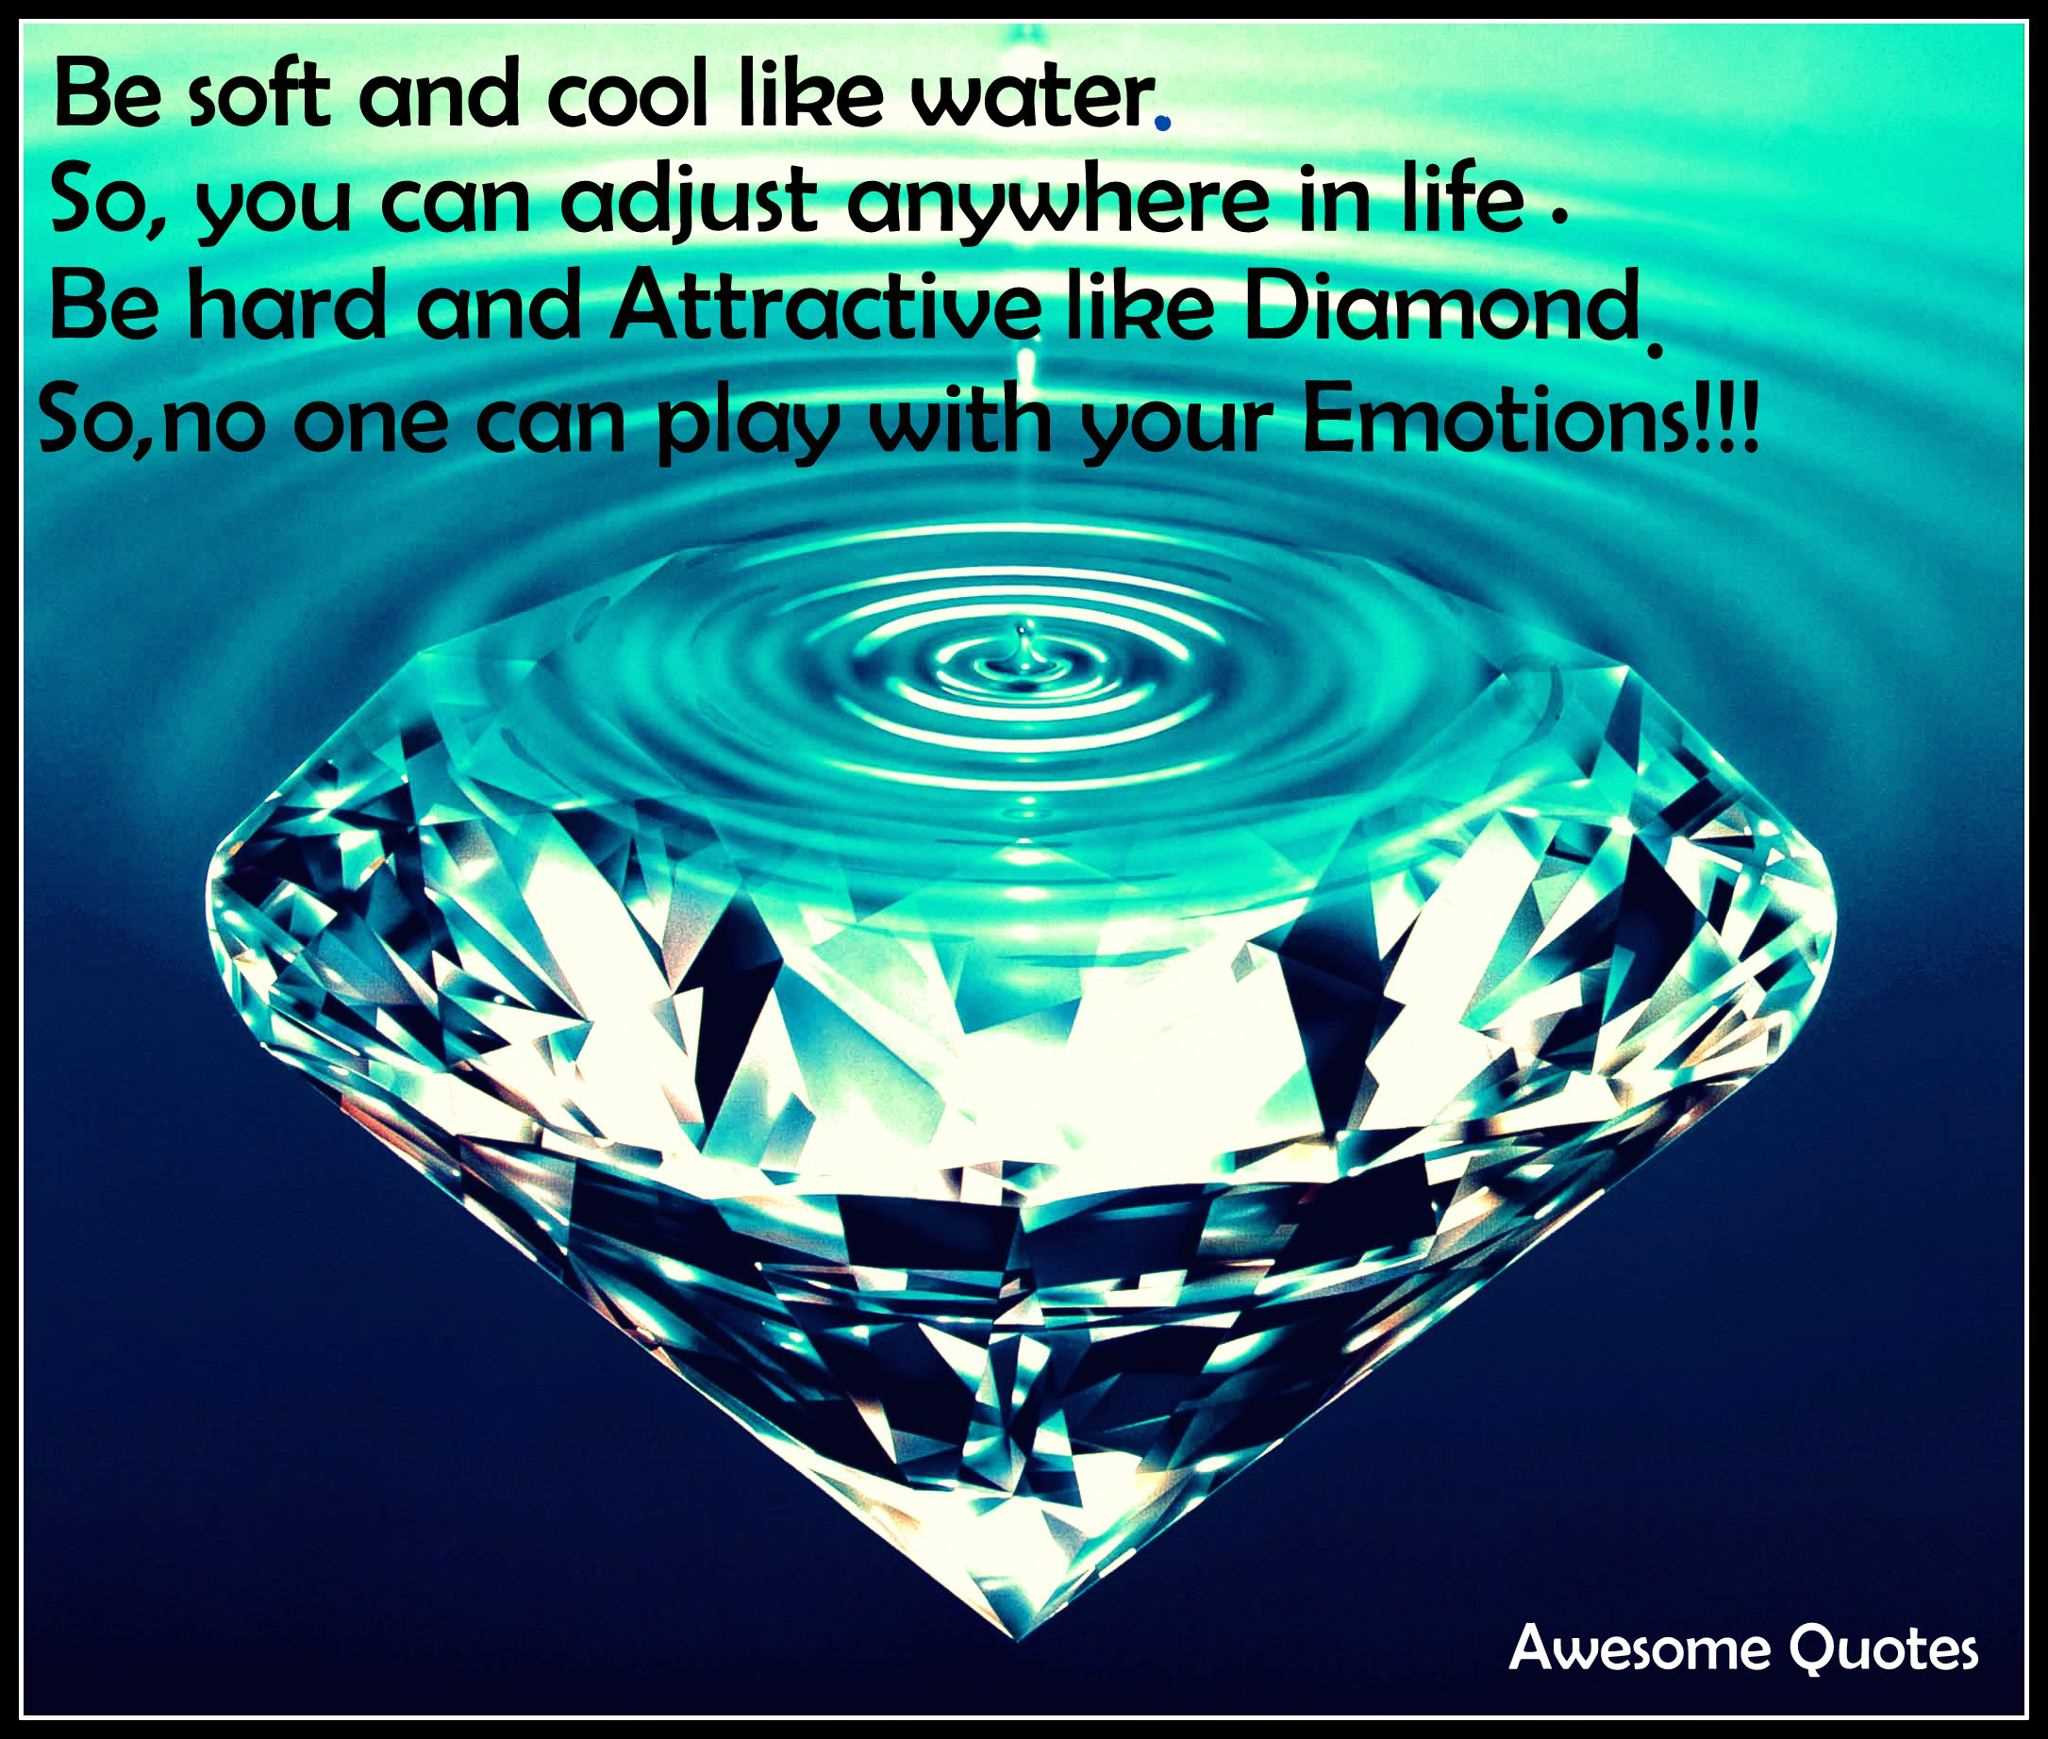 Water Is Life Quotes
 Quotes About Life And Water QuotesGram